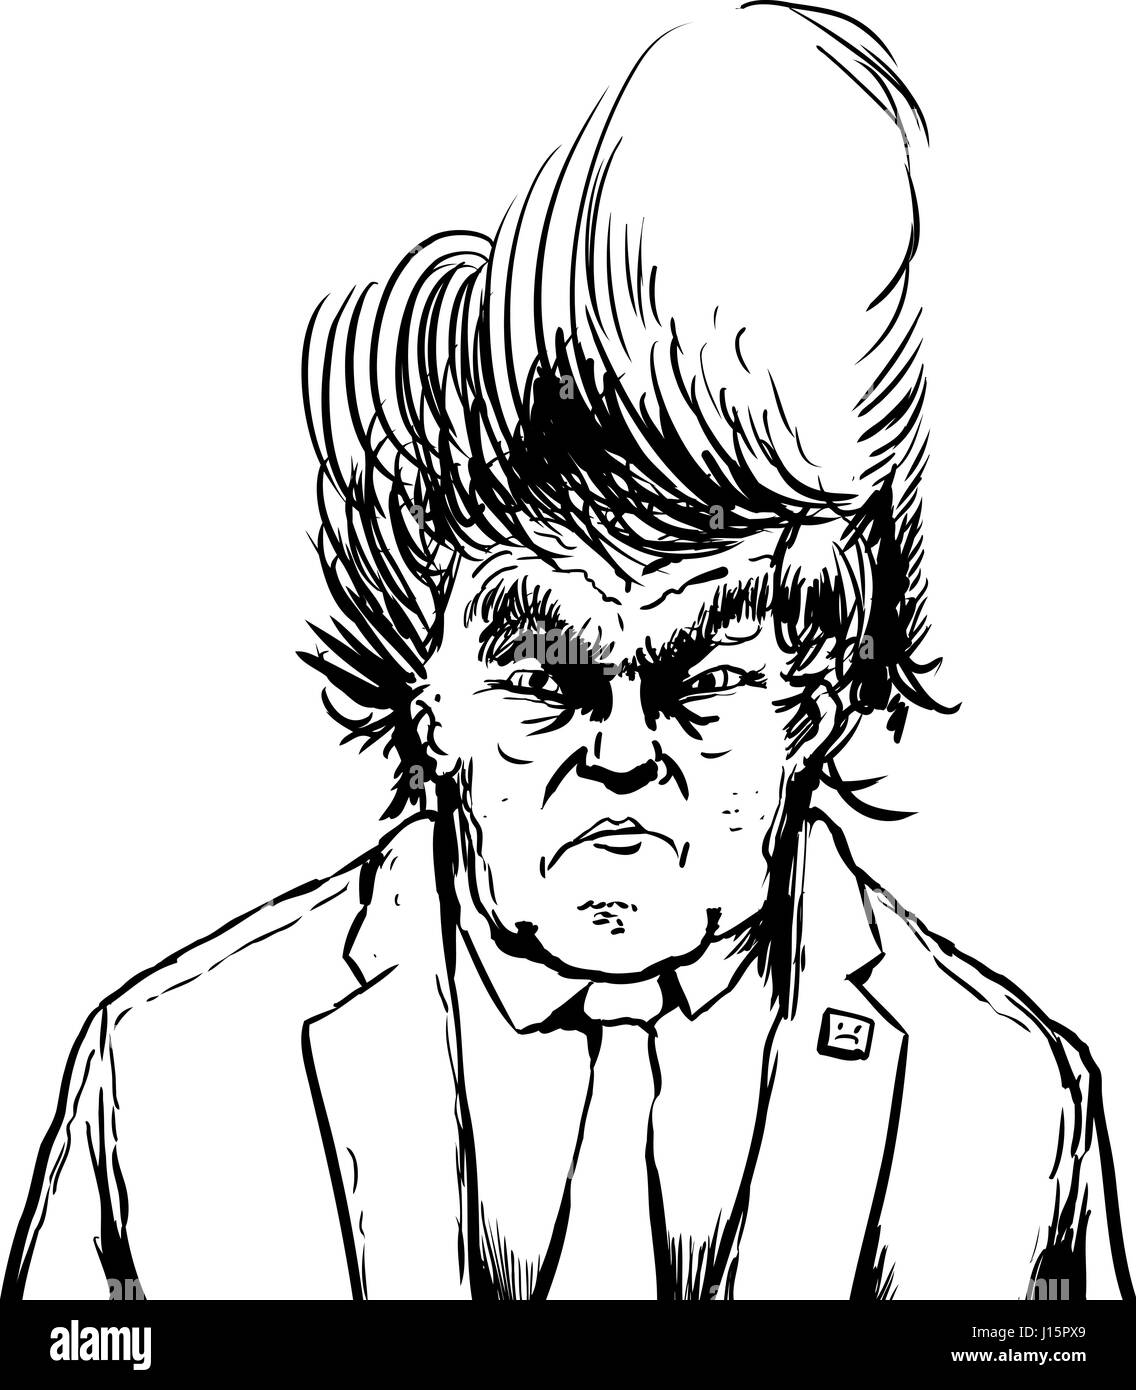 April 18, 2017. Outline of pouting Donald Trump with tacky hairdo Stock Photo